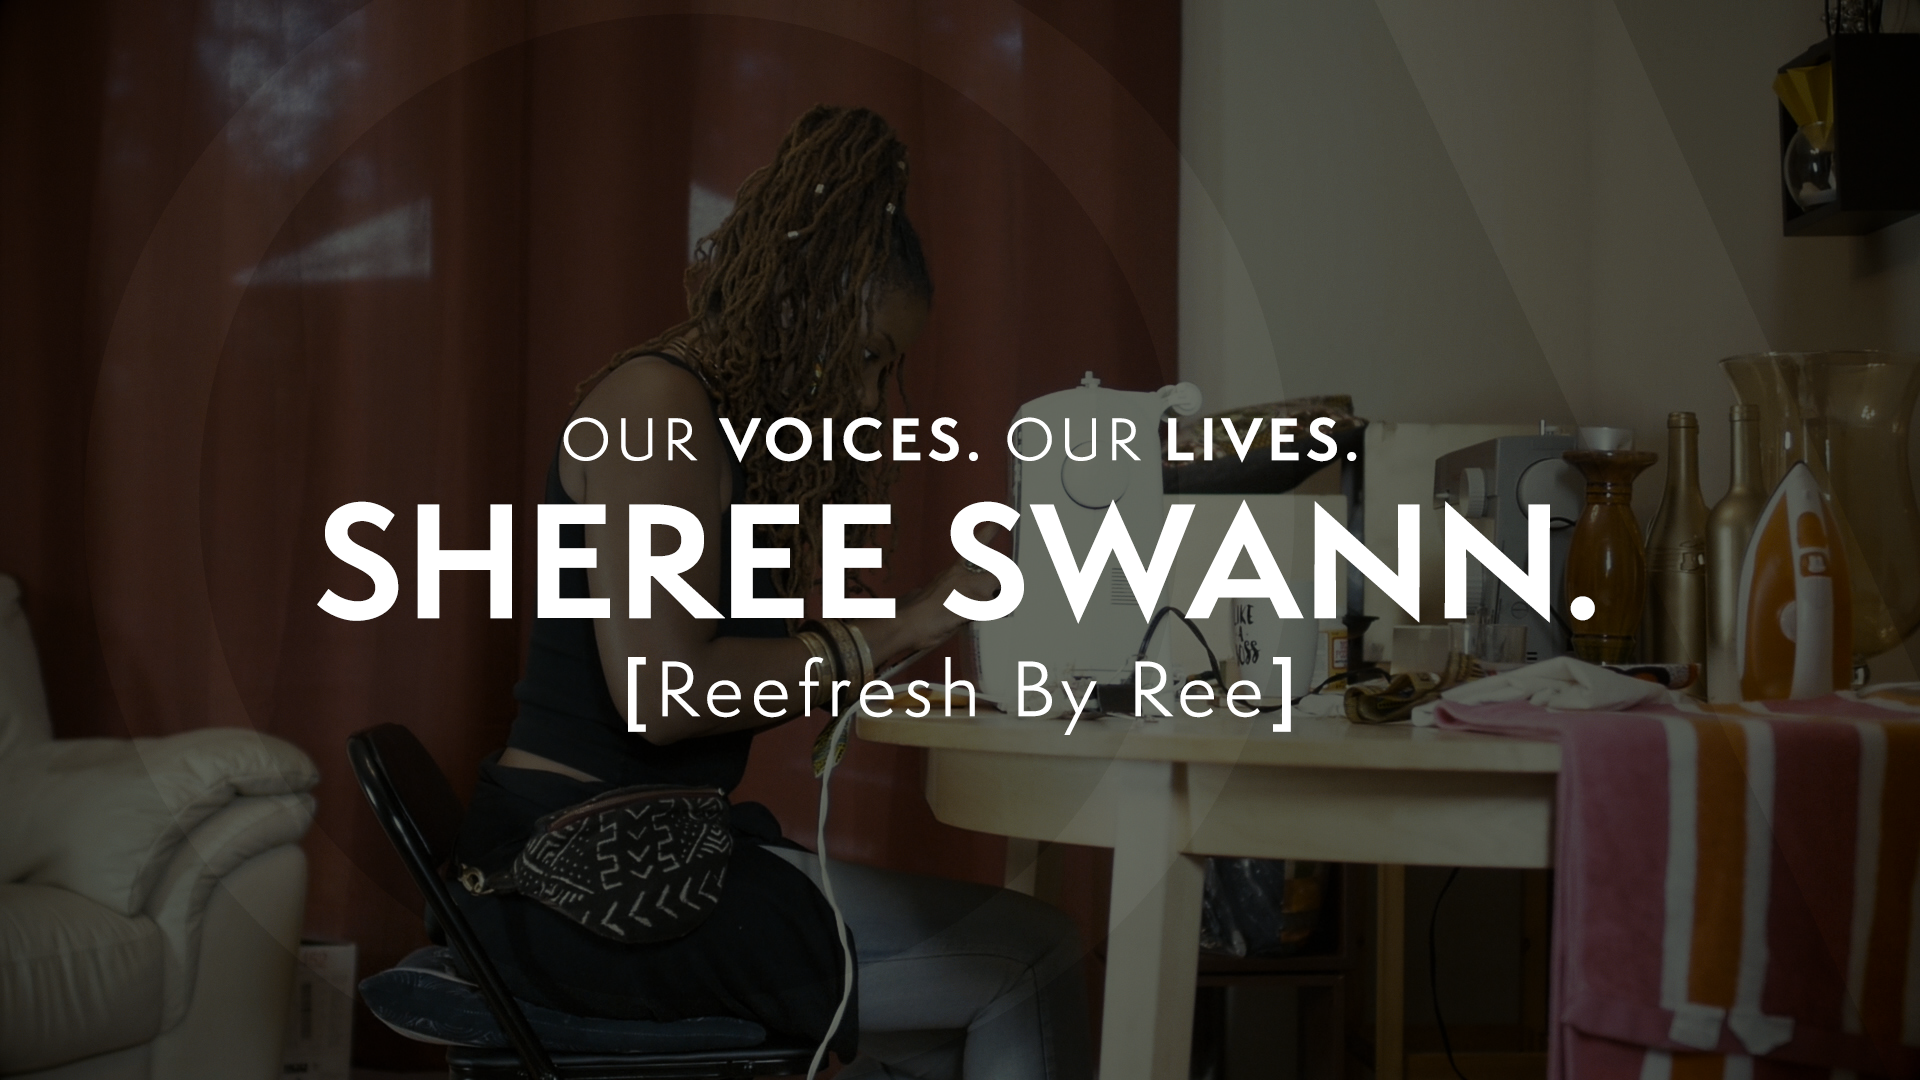 Our Voices. Our Lives. presents SHEREE SWANN.